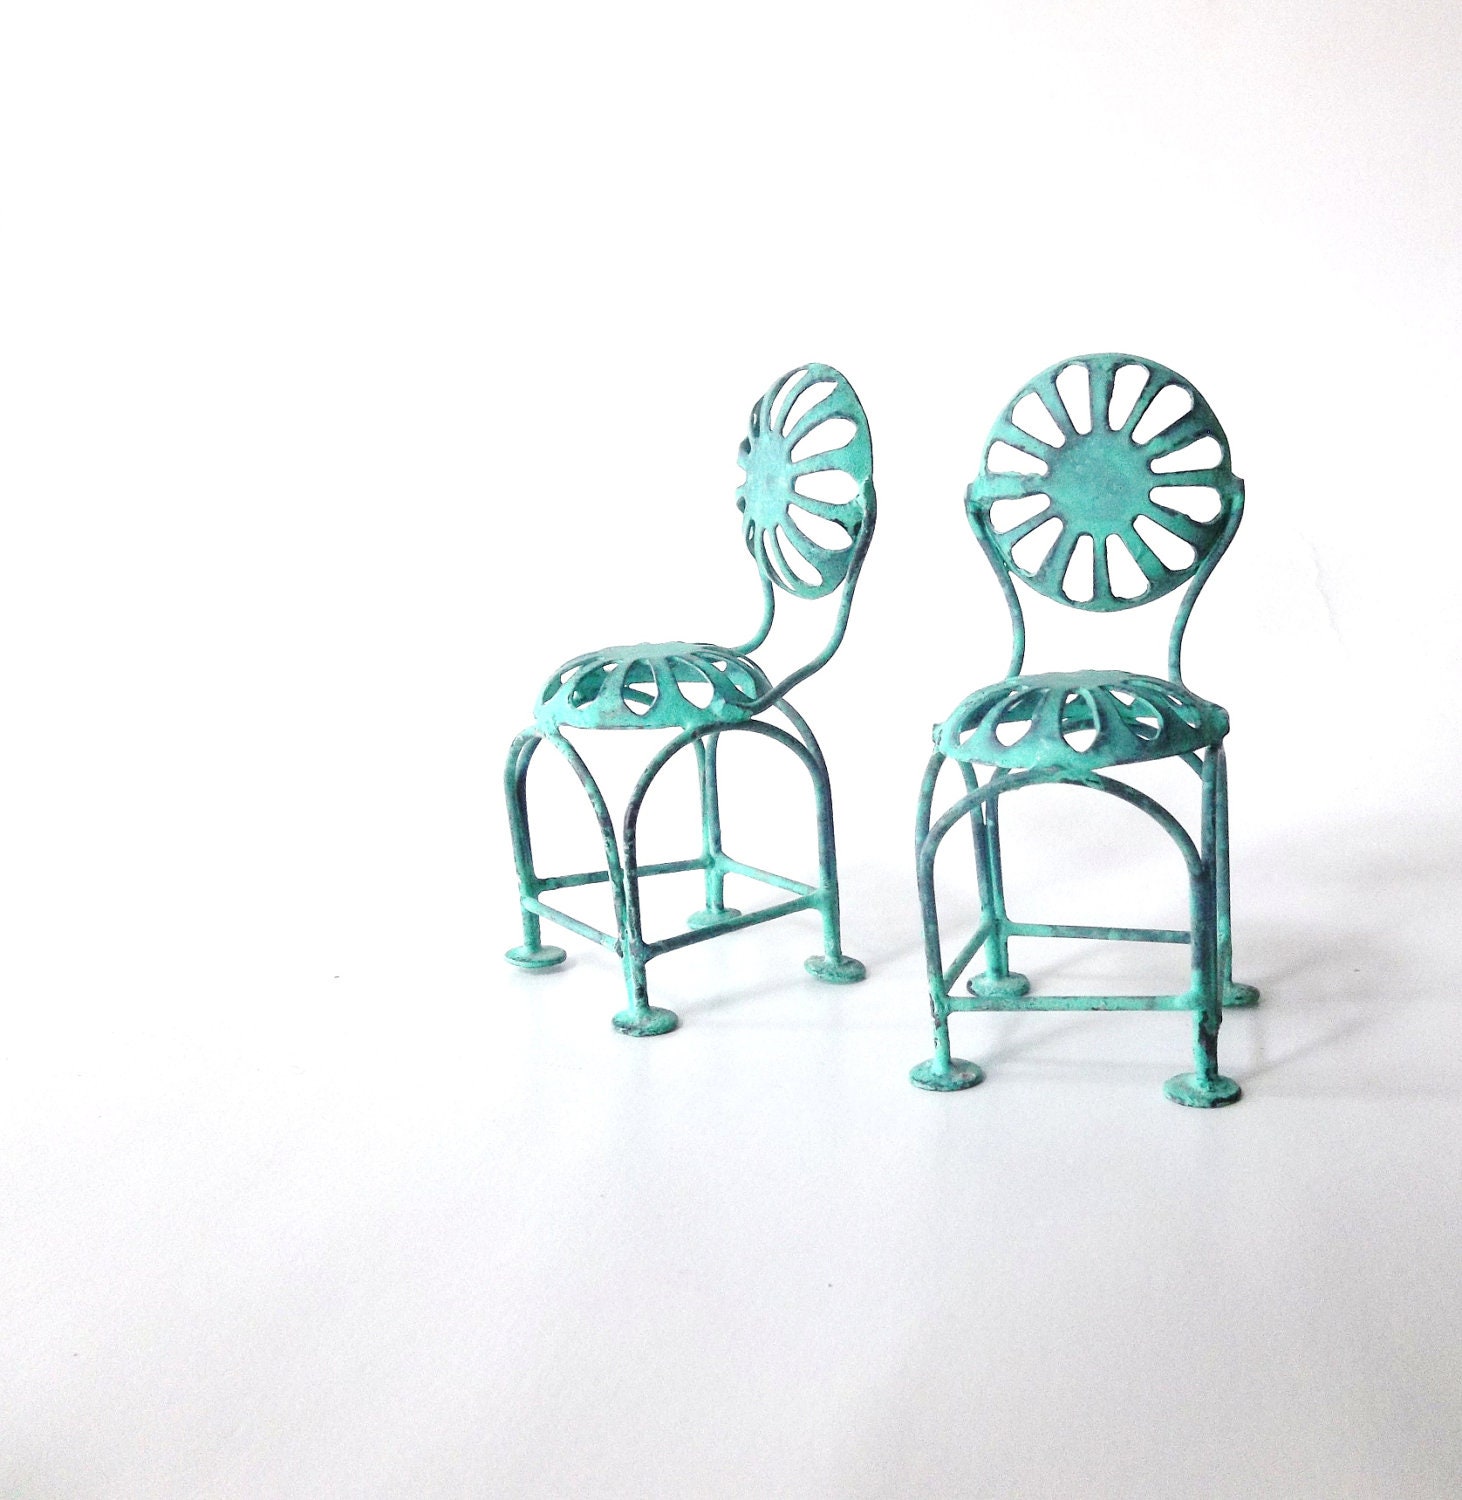 Bistro Cafe Doll House Chairs. Teal Aqua. Miniature Wrought iron Beach Chairs. Photography Print . Home Decor Wall art - 3vintagehearts